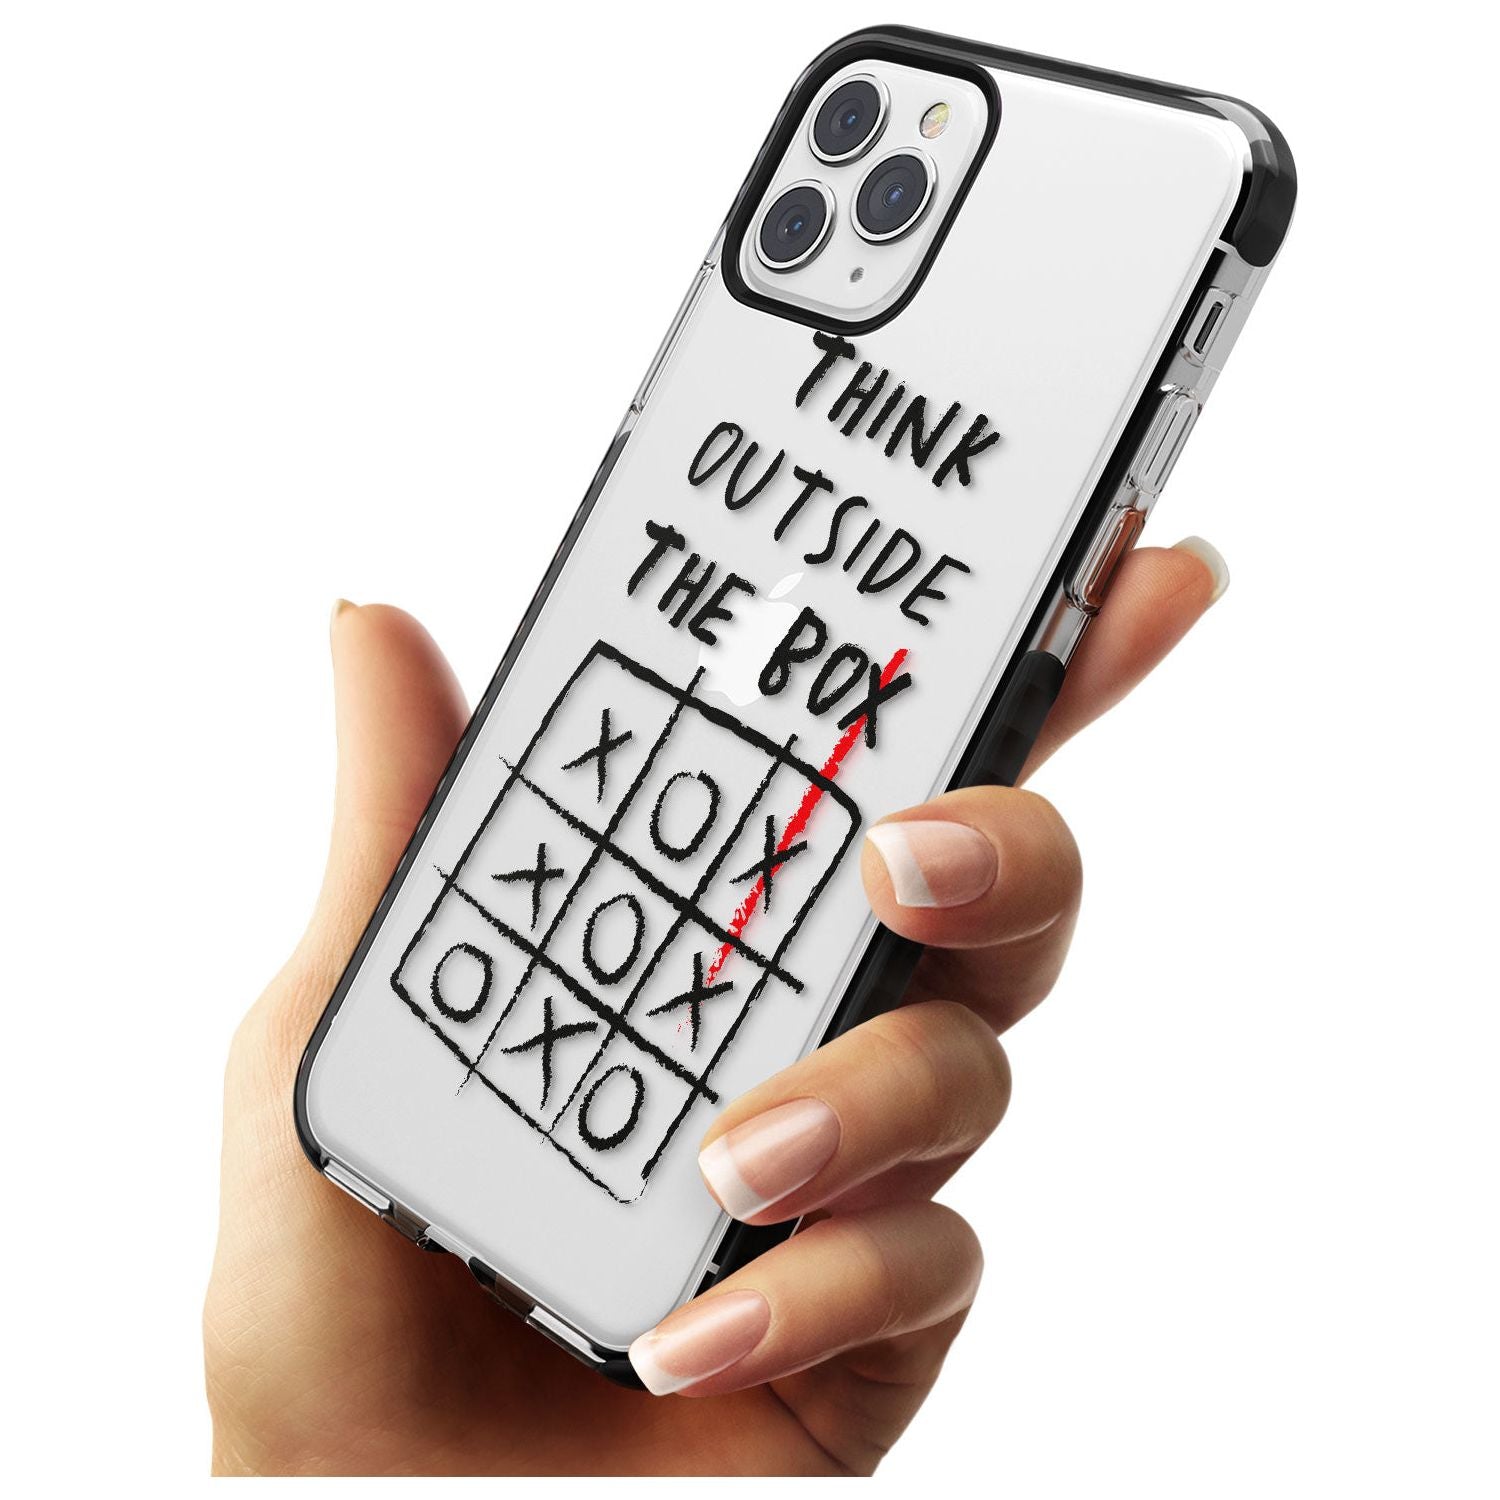 "Think Outside the Box" Black Impact Phone Case for iPhone 11 Pro Max